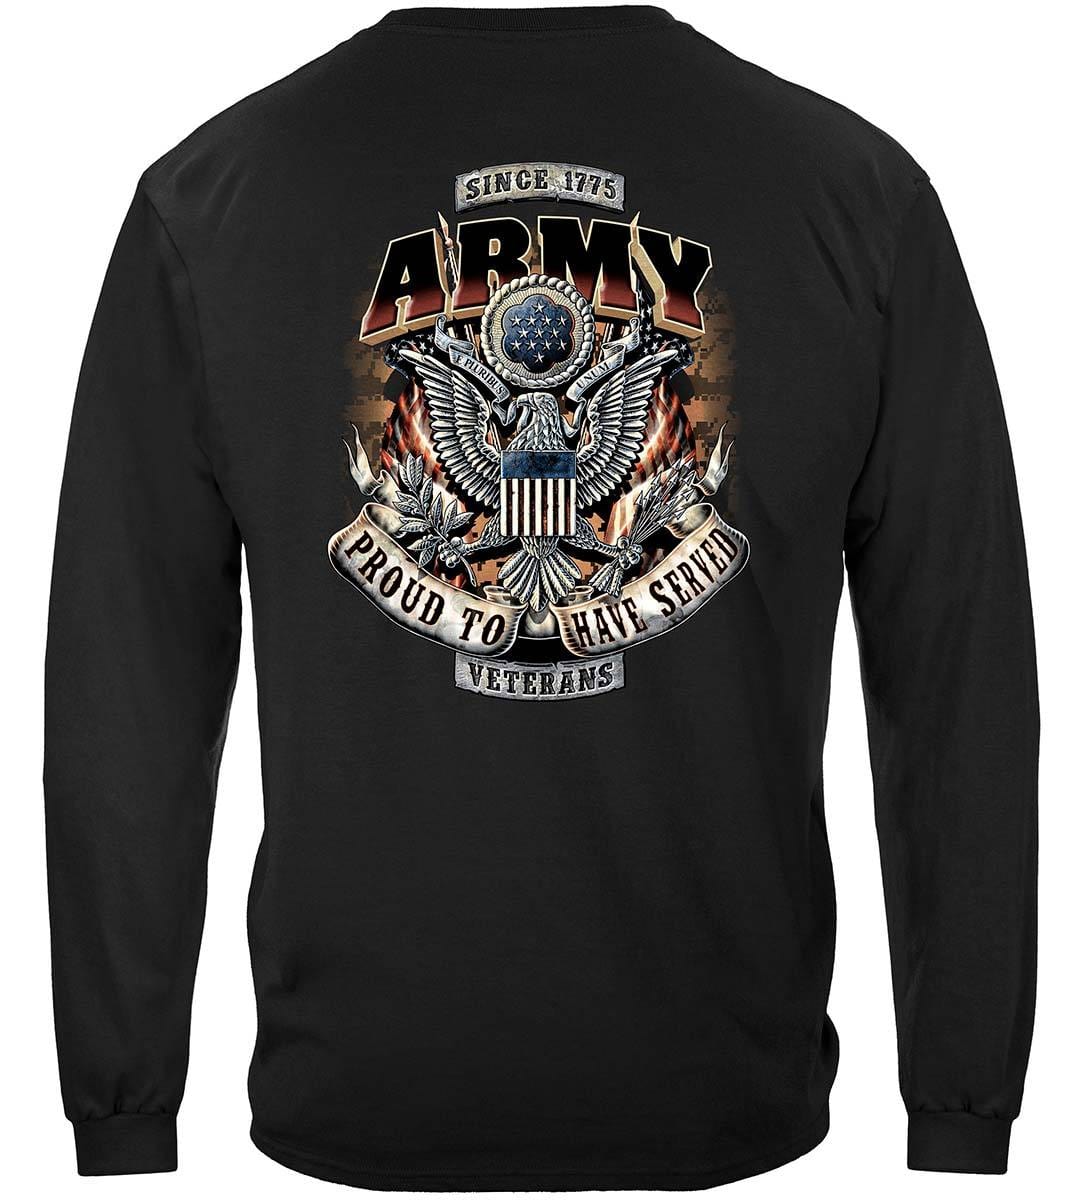 Army Proud To Have Served Premium Hooded Sweat Shirt